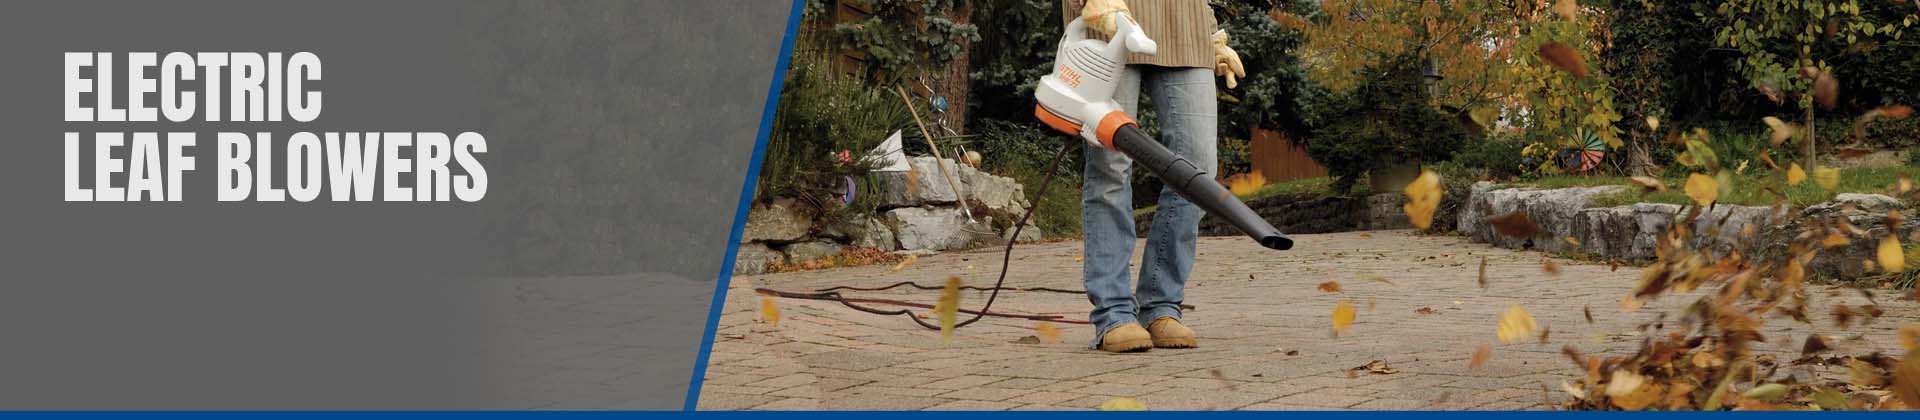 Electric Leaf Blowers - SHOP NOW